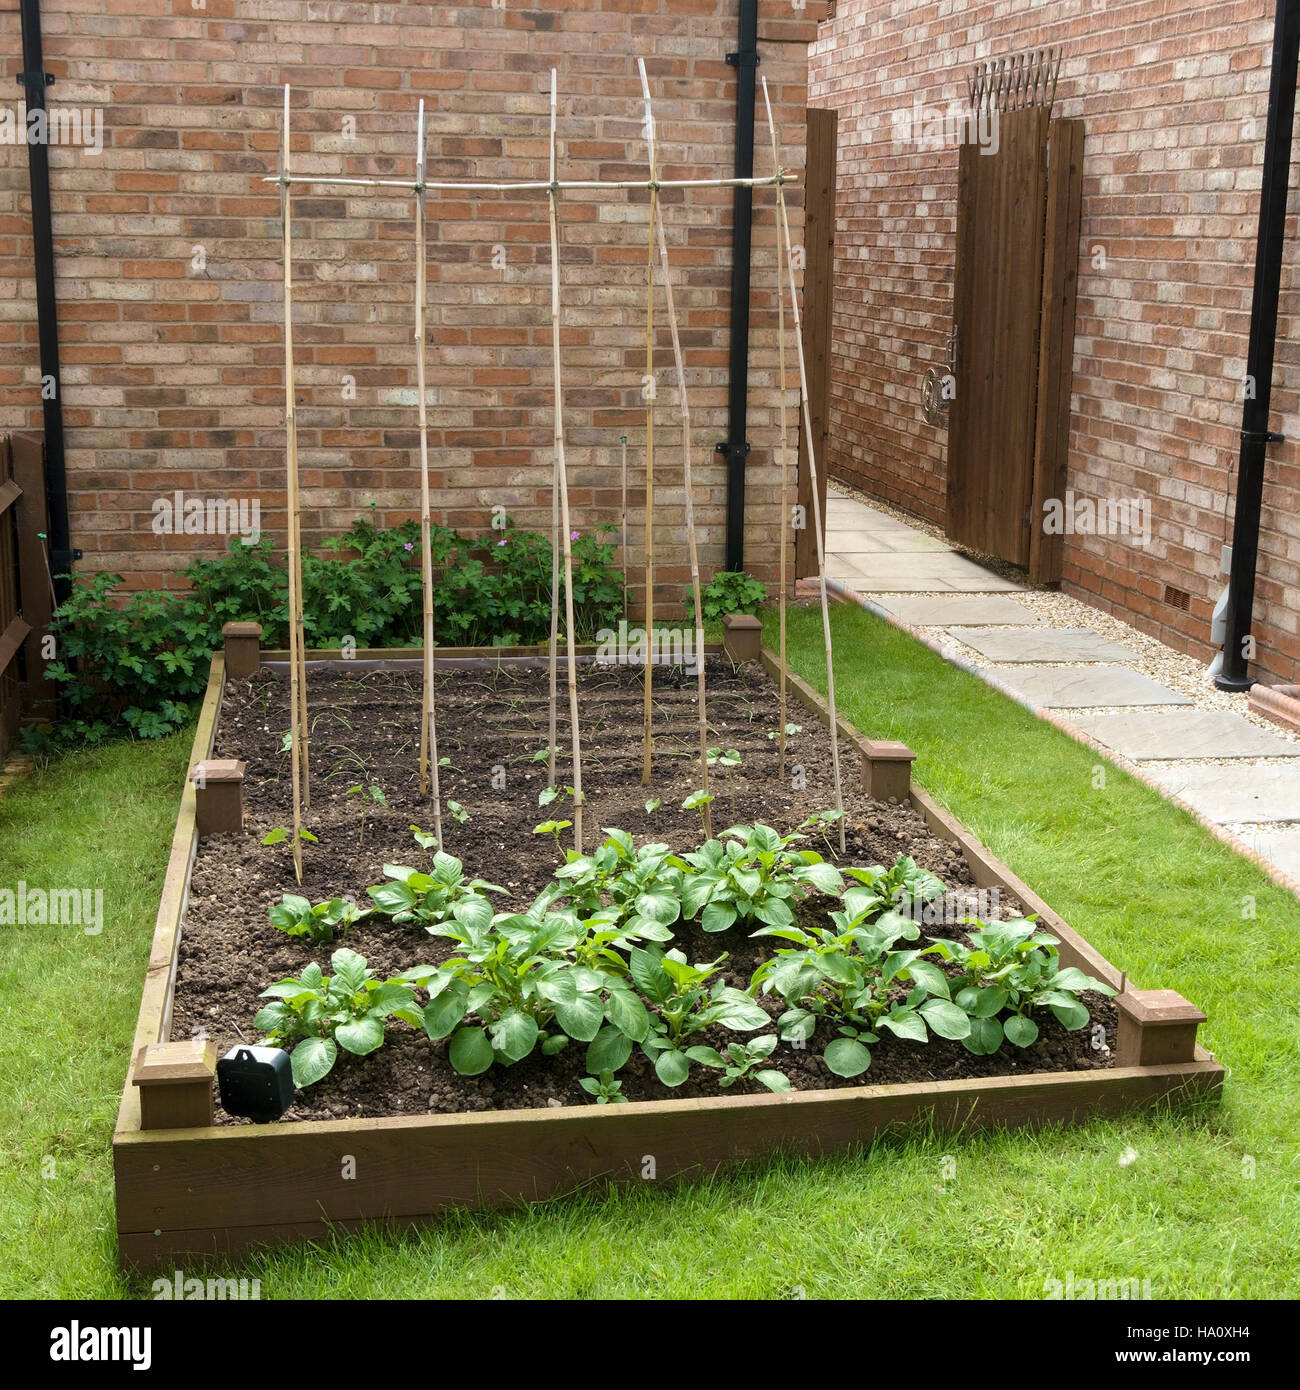 Raised bed vegetable plot set into lawn with bamboo bean poles and potato plant seedlings. Stock Photo